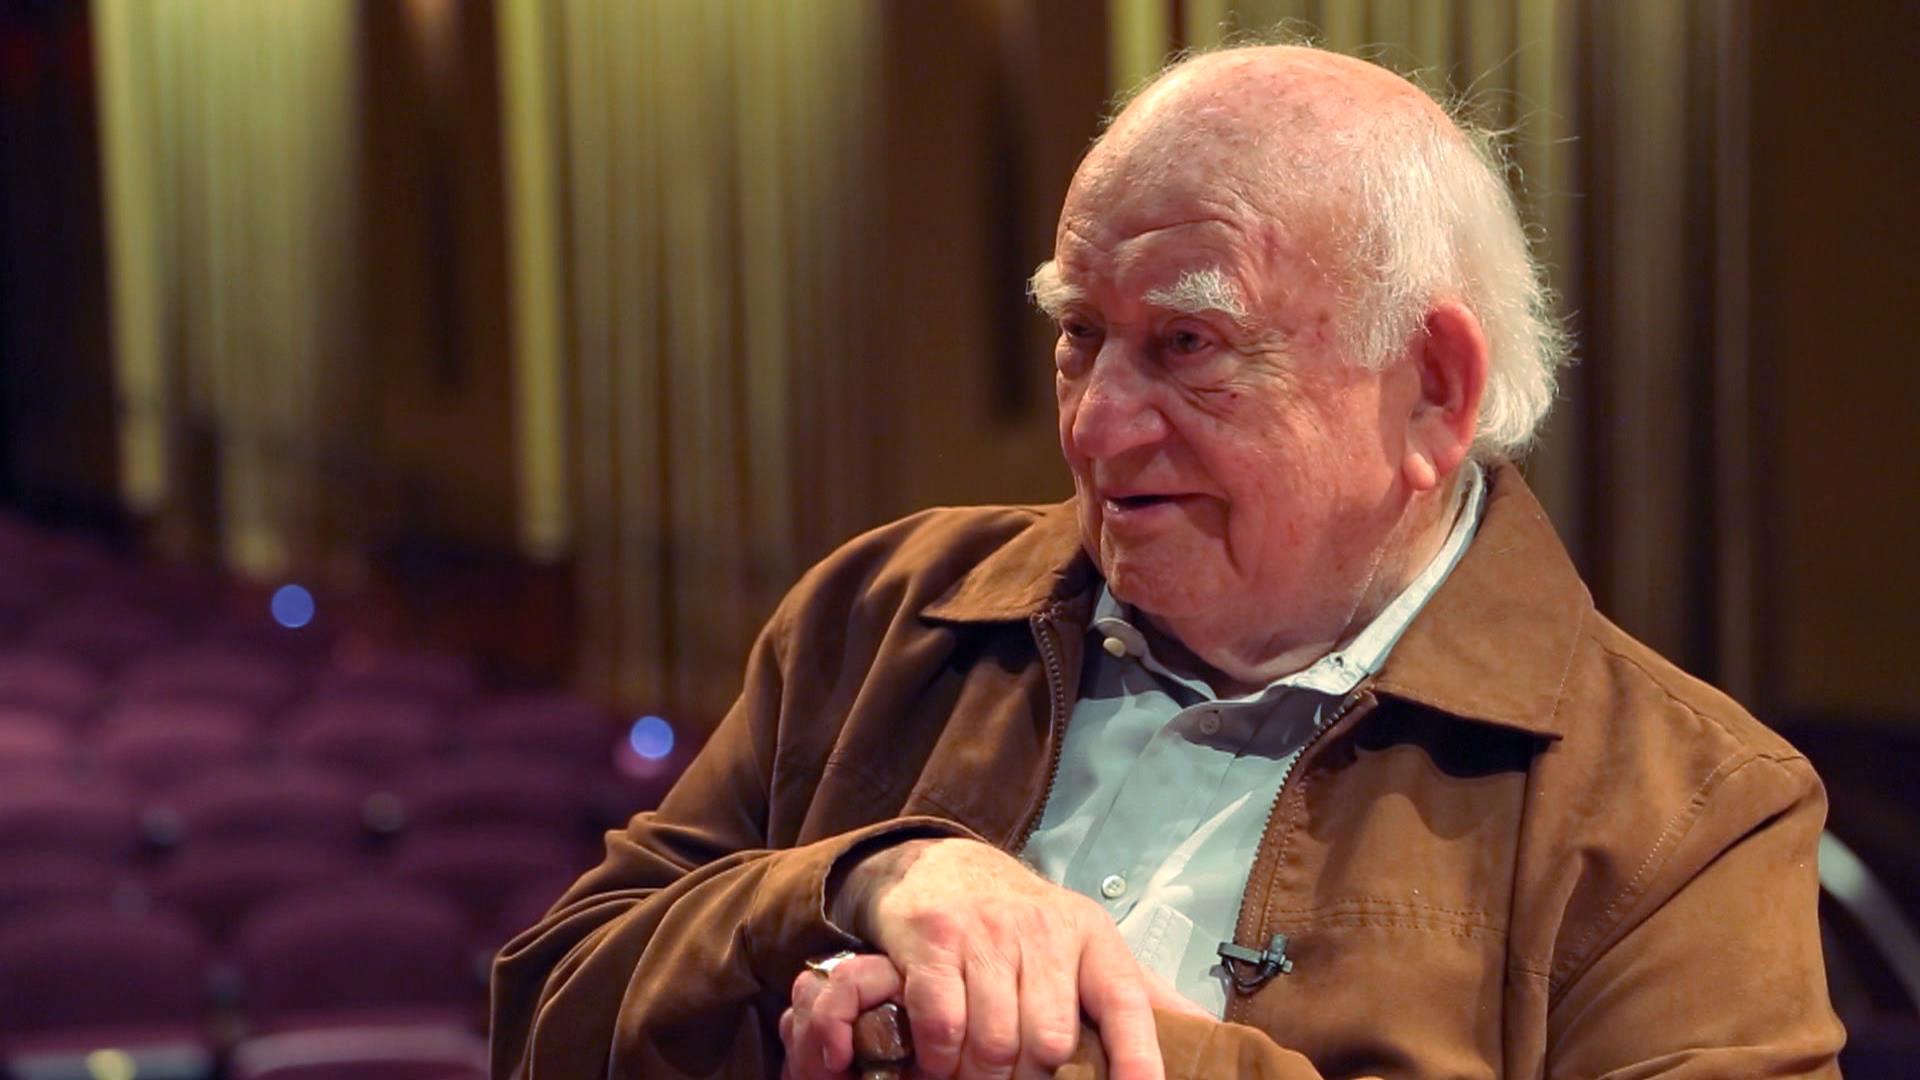 Ed Asner is still going strong at age 87: 'I LOVE spunk' - TODAY.com